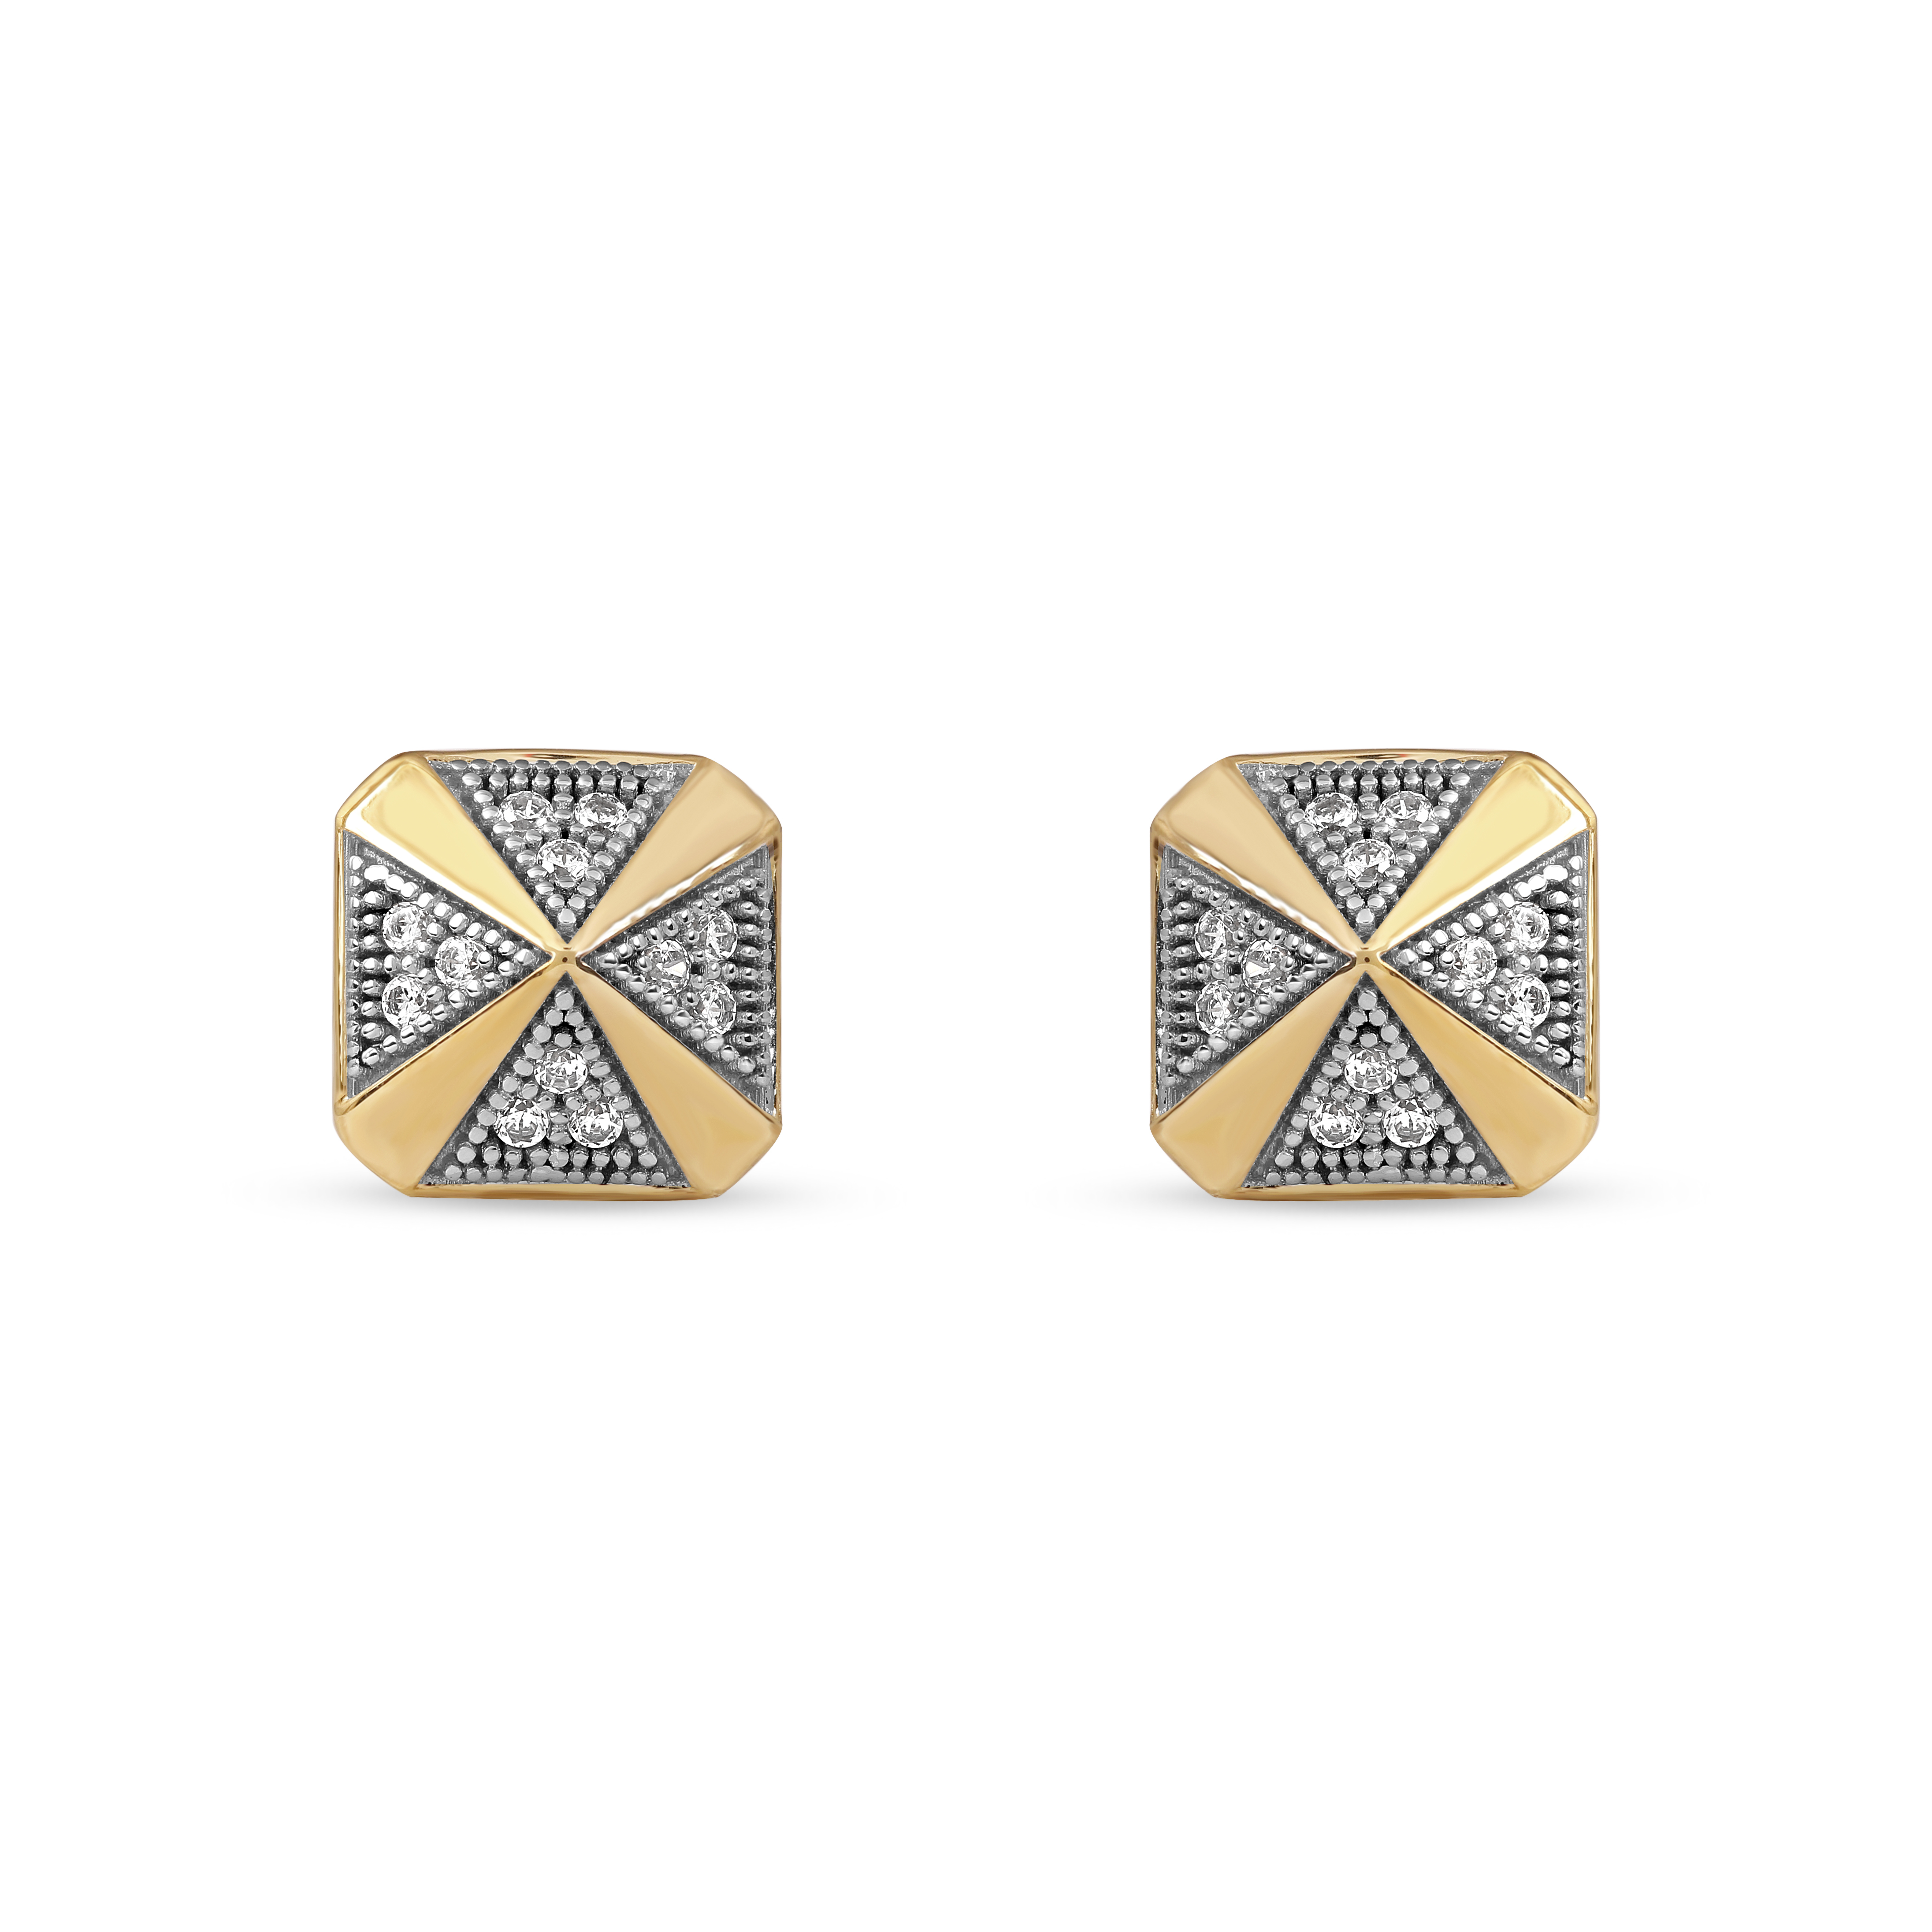 Amouria S925 Sterling Silver 1/10 Ct Diamond Stud Earrings with Yellow Rhodium Overlay